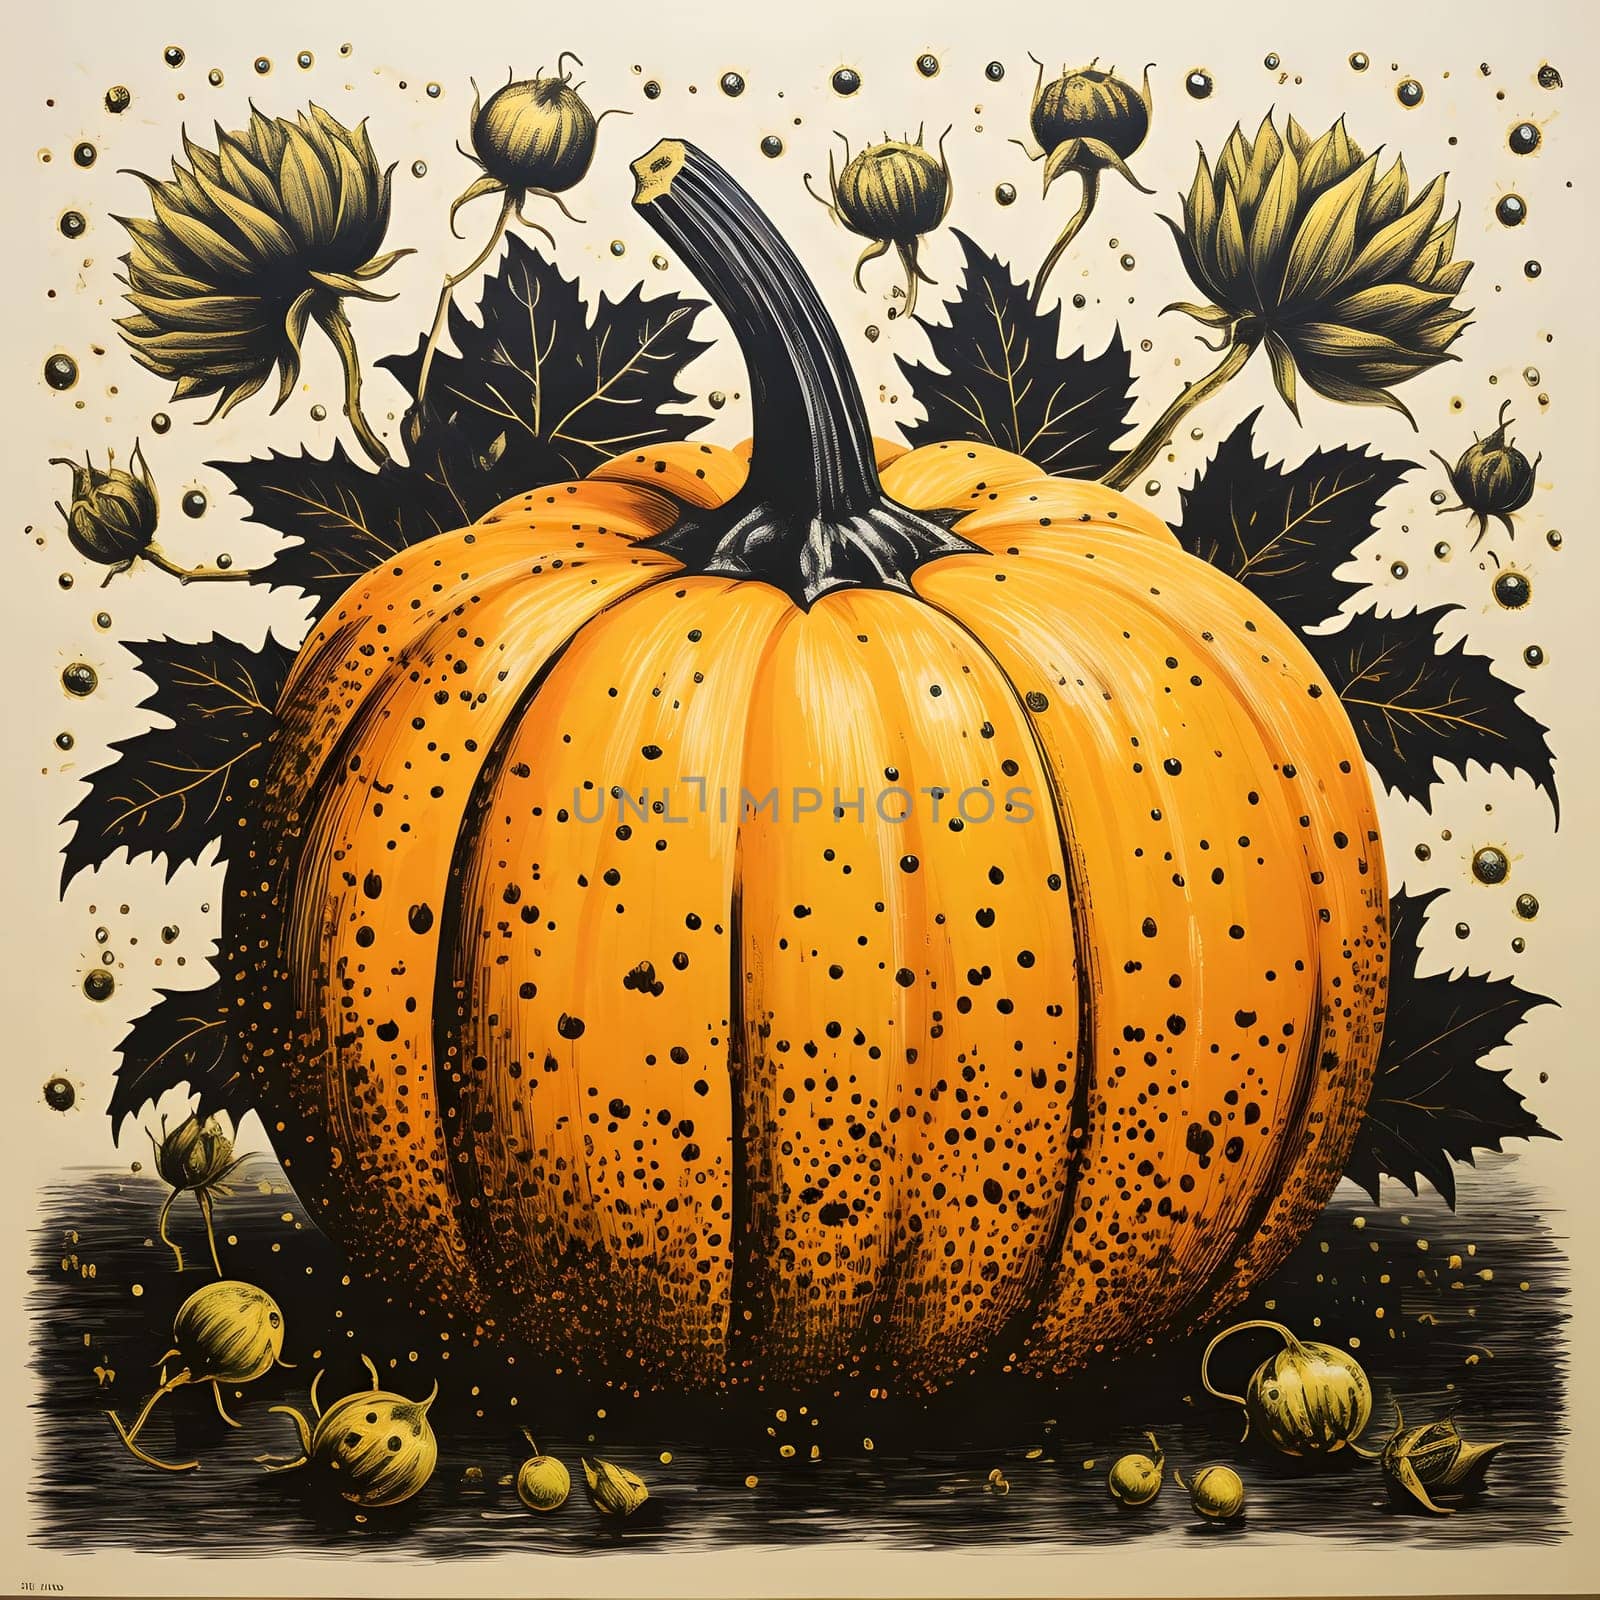 Illustration of orange pumpkin with black dots leaves and flower offshoots. Pumpkin as a dish of thanksgiving for the harvest. An atmosphere of joy and celebration.